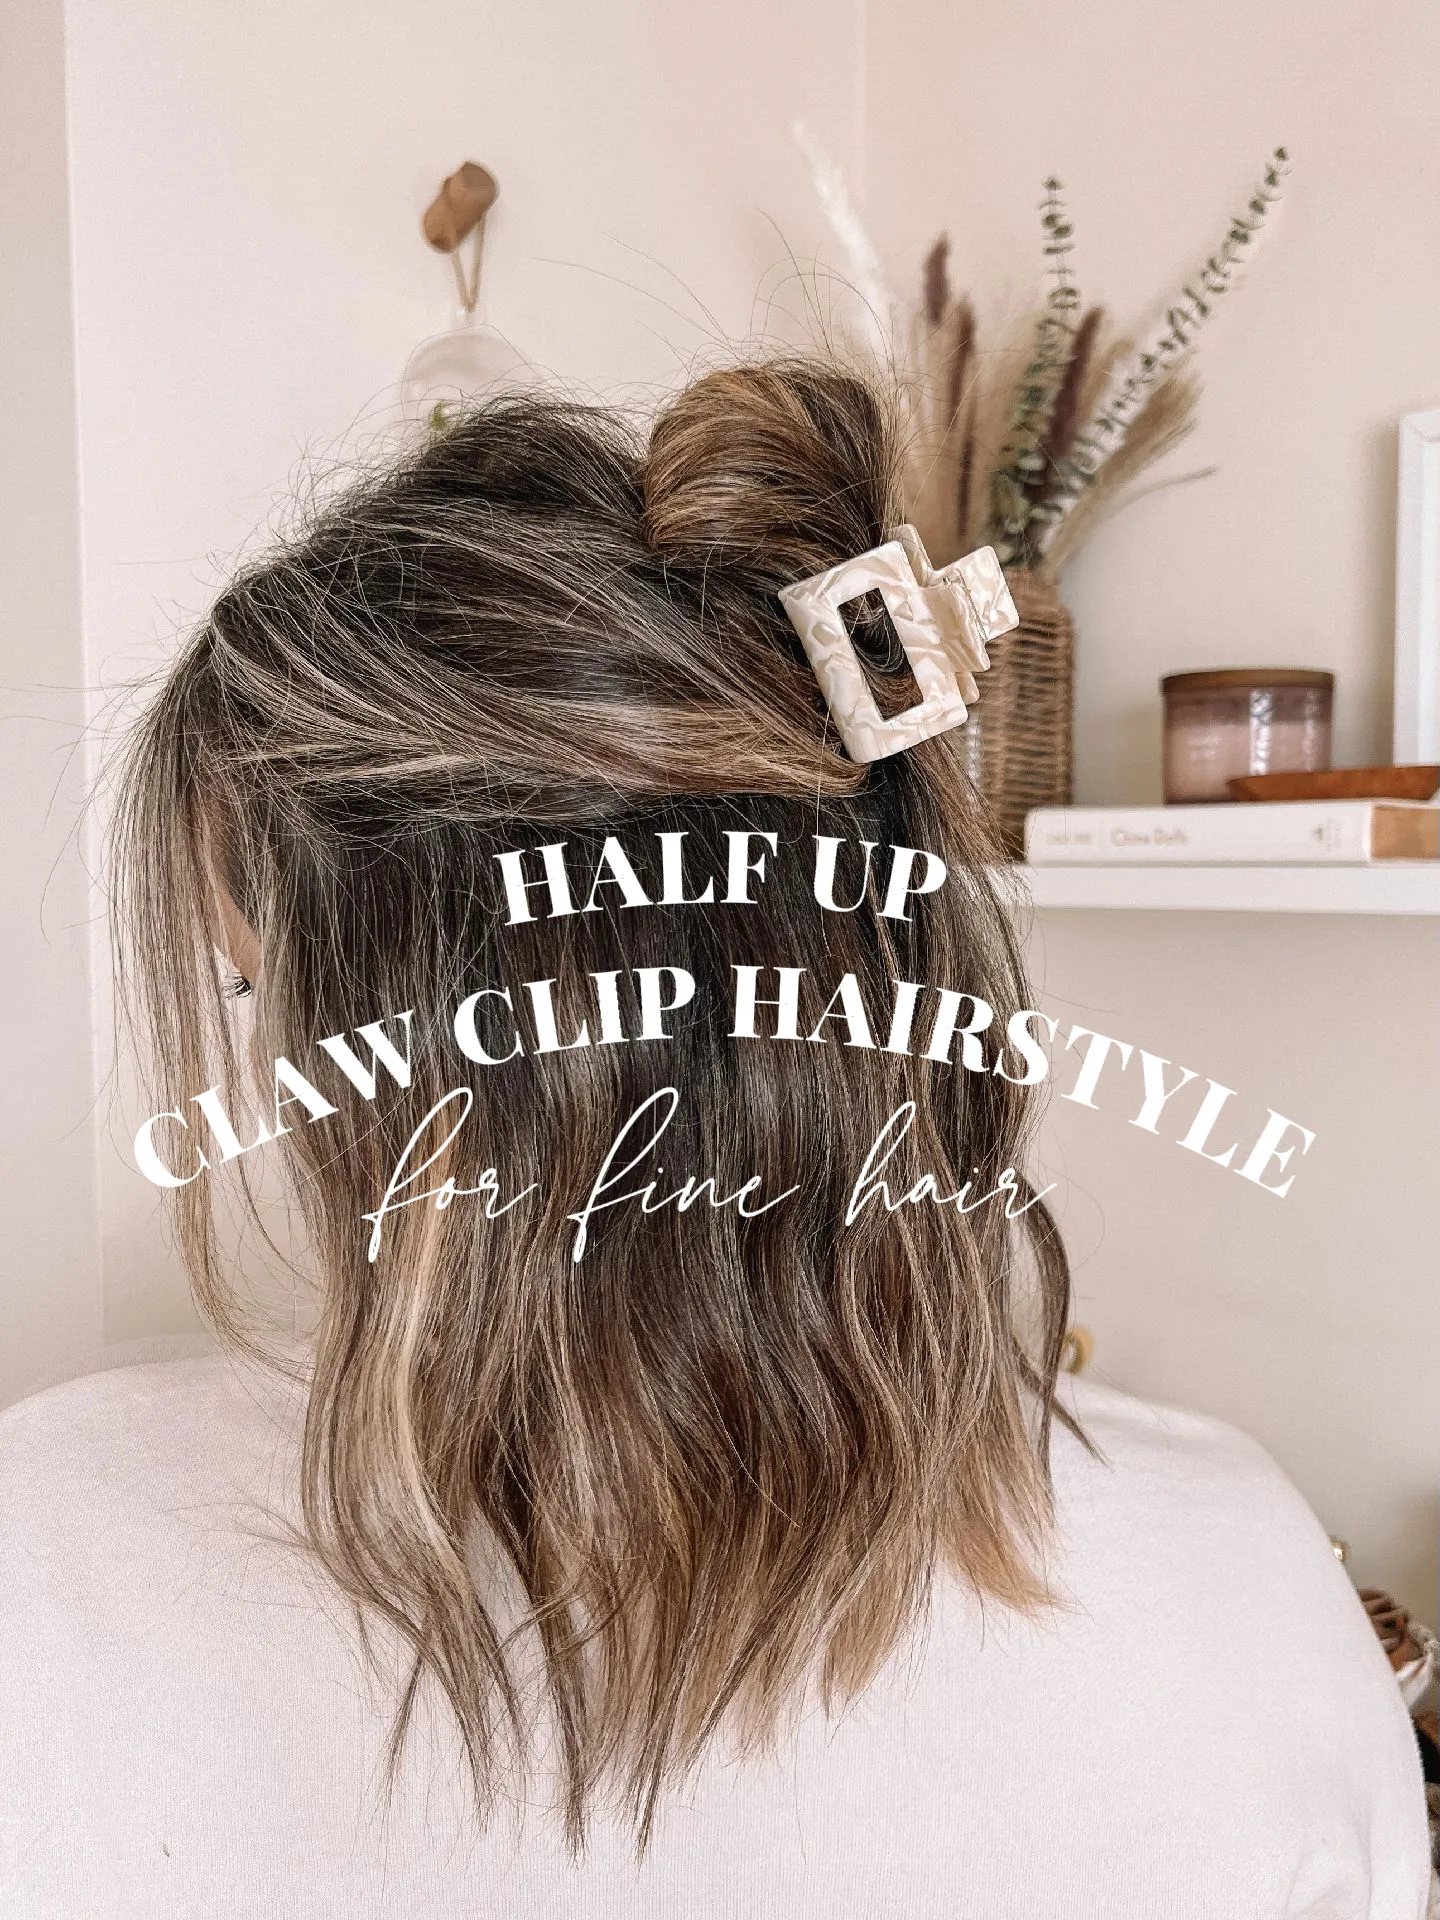 How to Style a Claw Clip: 10 Clawc Clip Hairstyles to Try in 2023